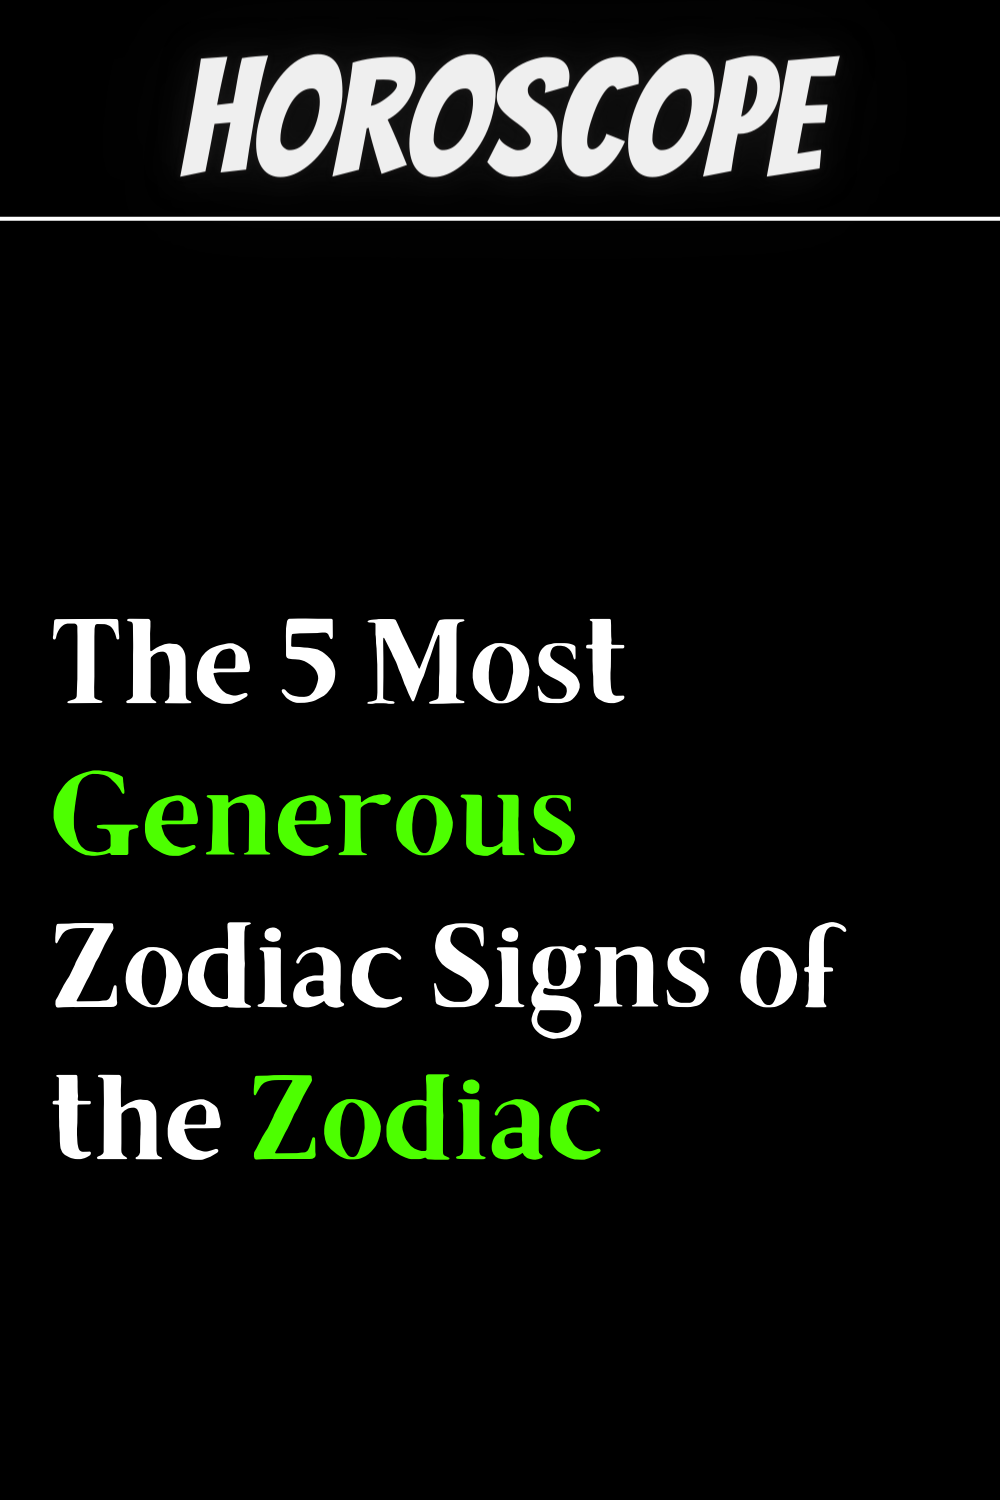 The 5 Most Generous Zodiac Signs of the Zodiac